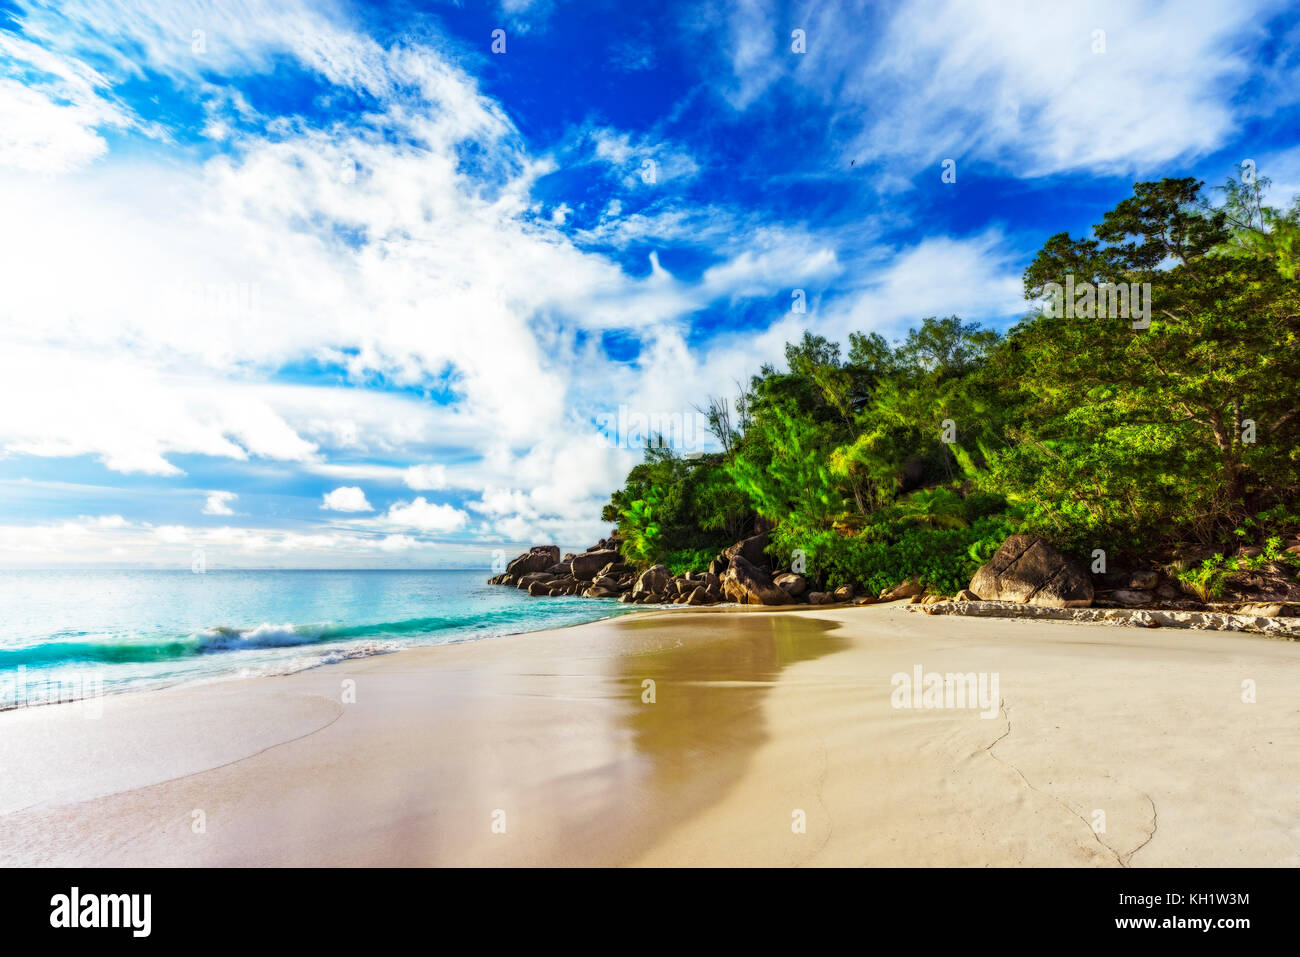 sunny day on paradise beach with big granite rocks, turquoise water, white sand and palm trees at anse georgette,praslin seychelles Stock Photo